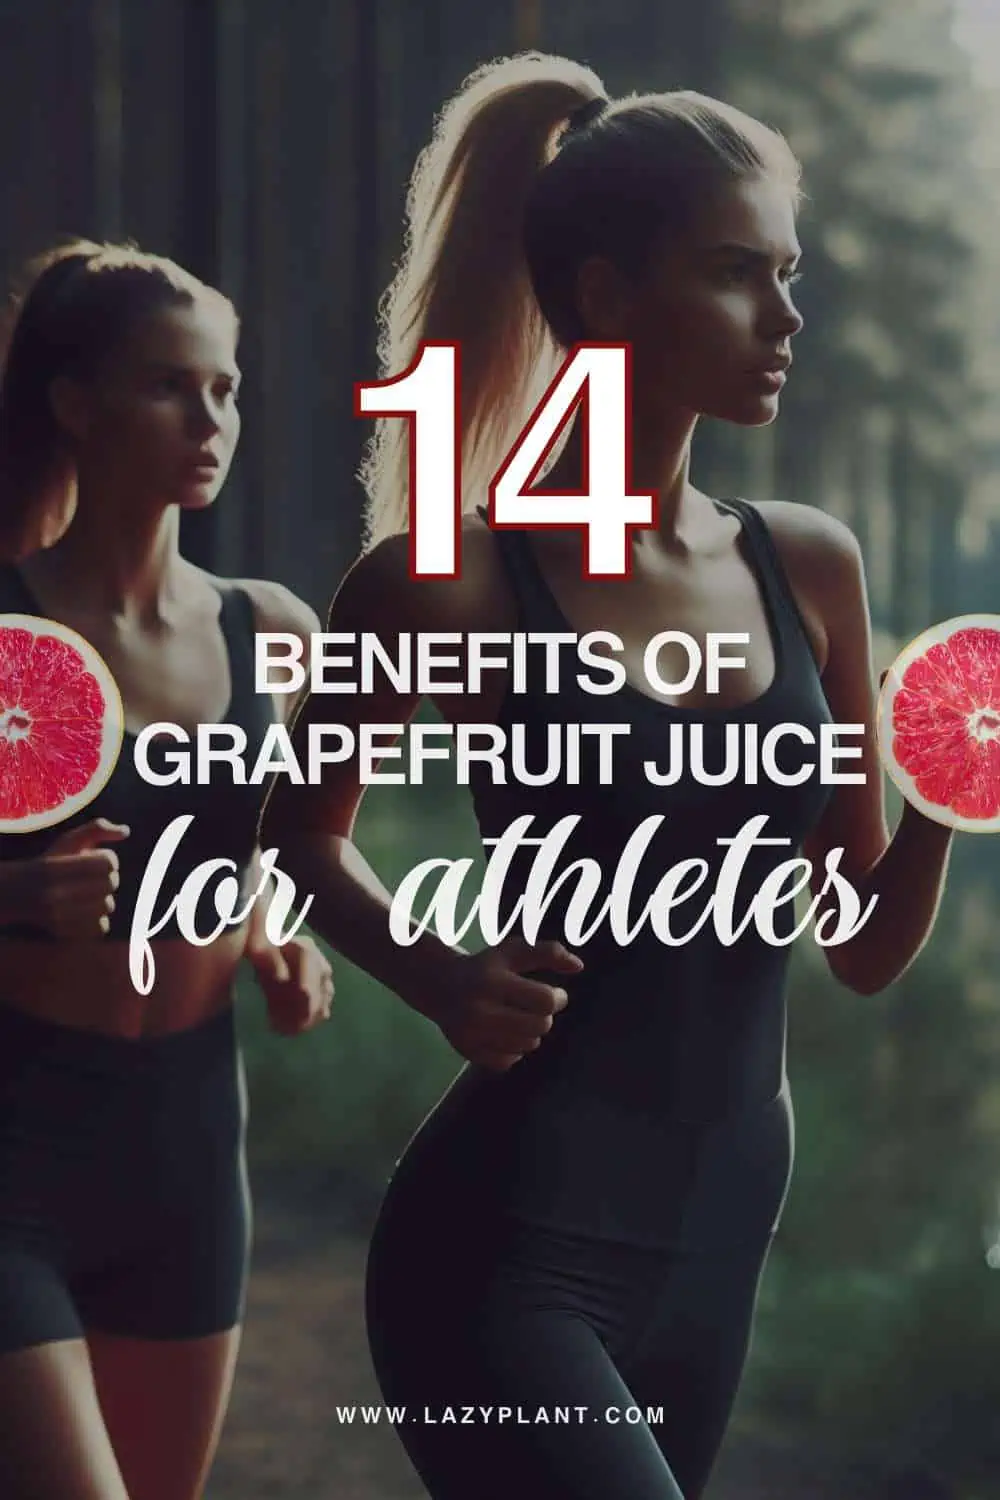 What’s the best time to drink grapefruit juice for athletes?